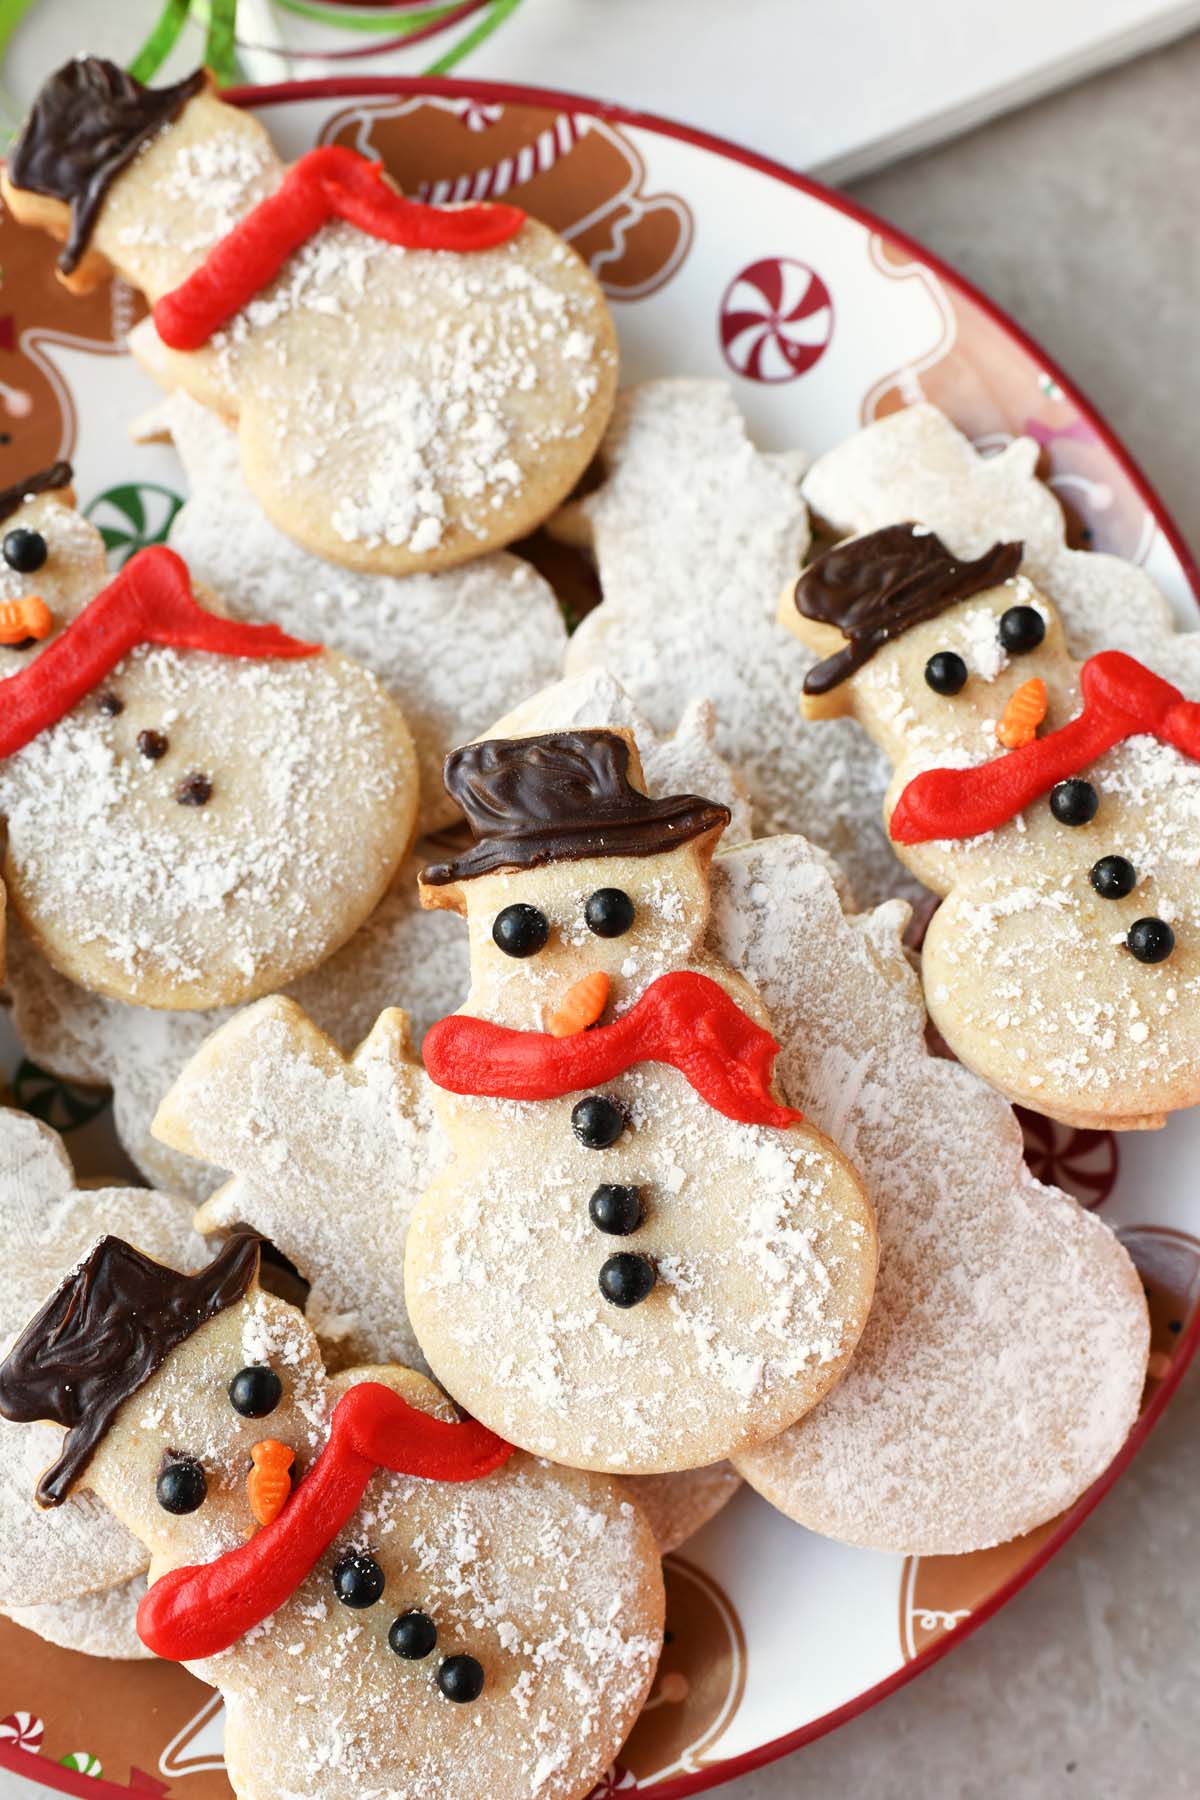 A plate of decorated snowman cookies with red scarves and black hats.